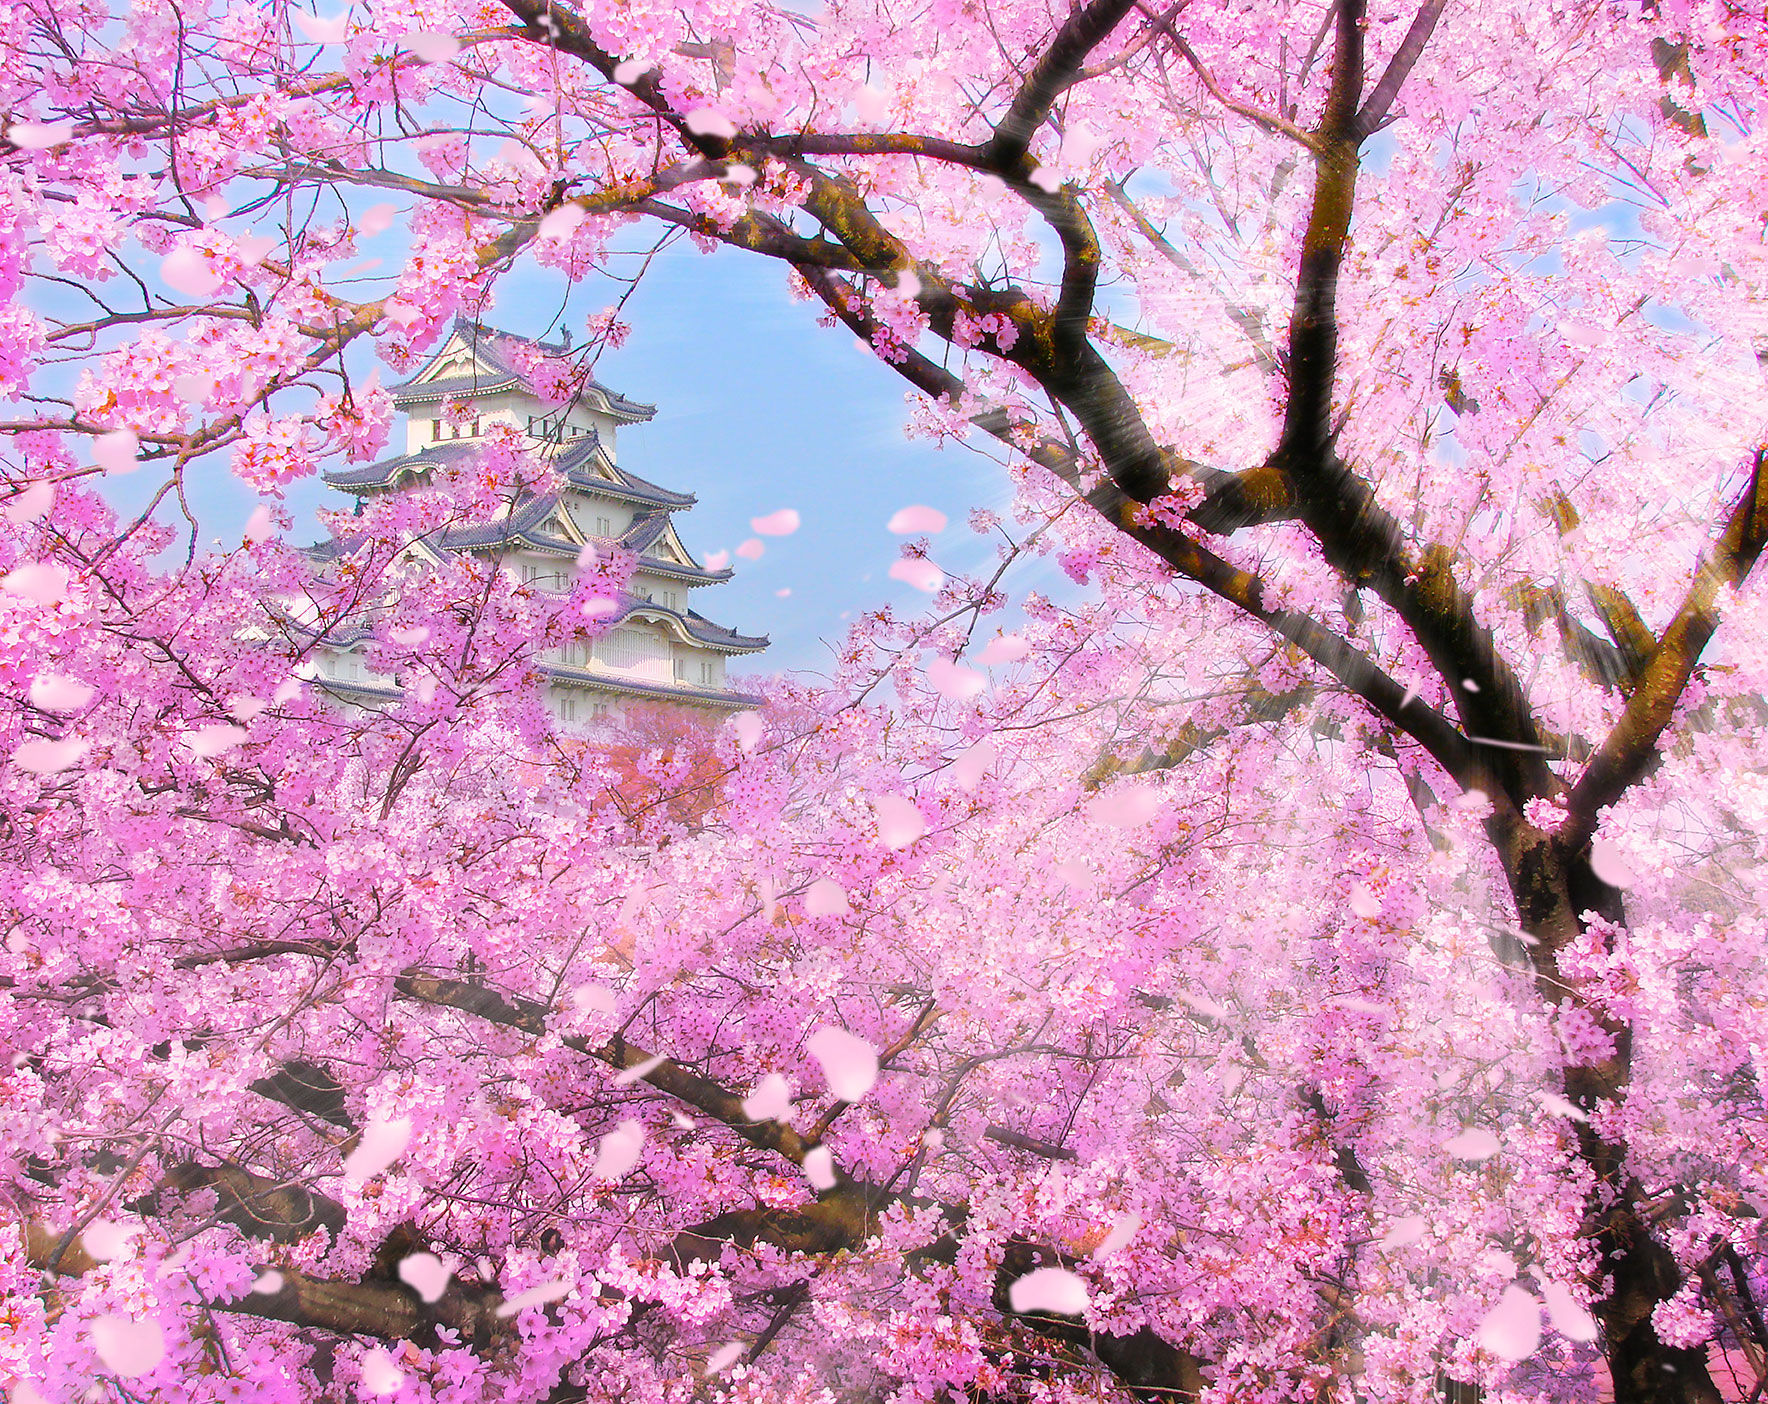 The White Heron Castle of Himeji, Kyoto, view through the cherry blossoms flowers (sakura) and sunlight rays